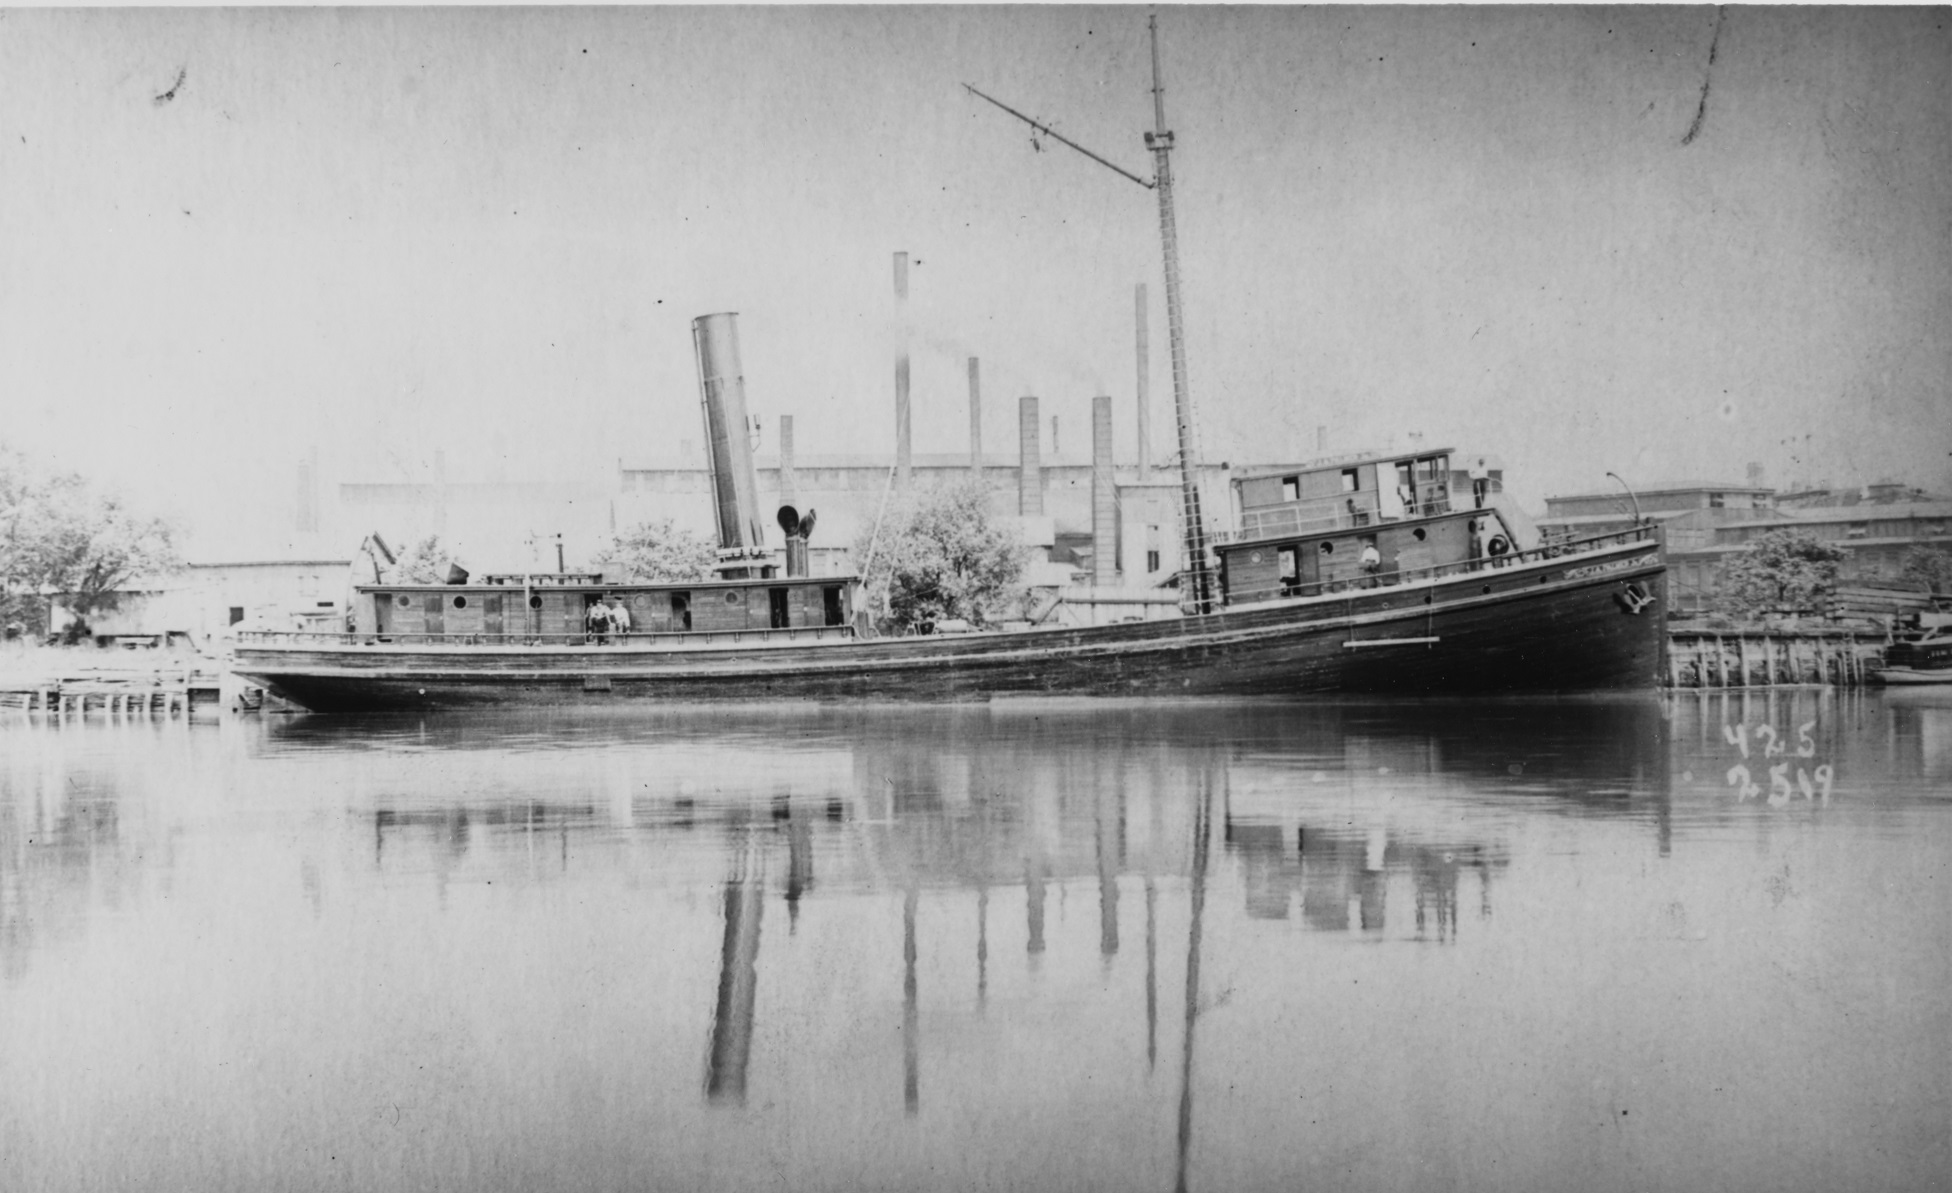 2.	Rare photograph of the Menhaden fishing vessel J.A. Palmer, later converted in World War I to a U.S. Navy minesweeper, which later became the Coast Guard cable layer Pequot. (Naval History and Heritage Command)